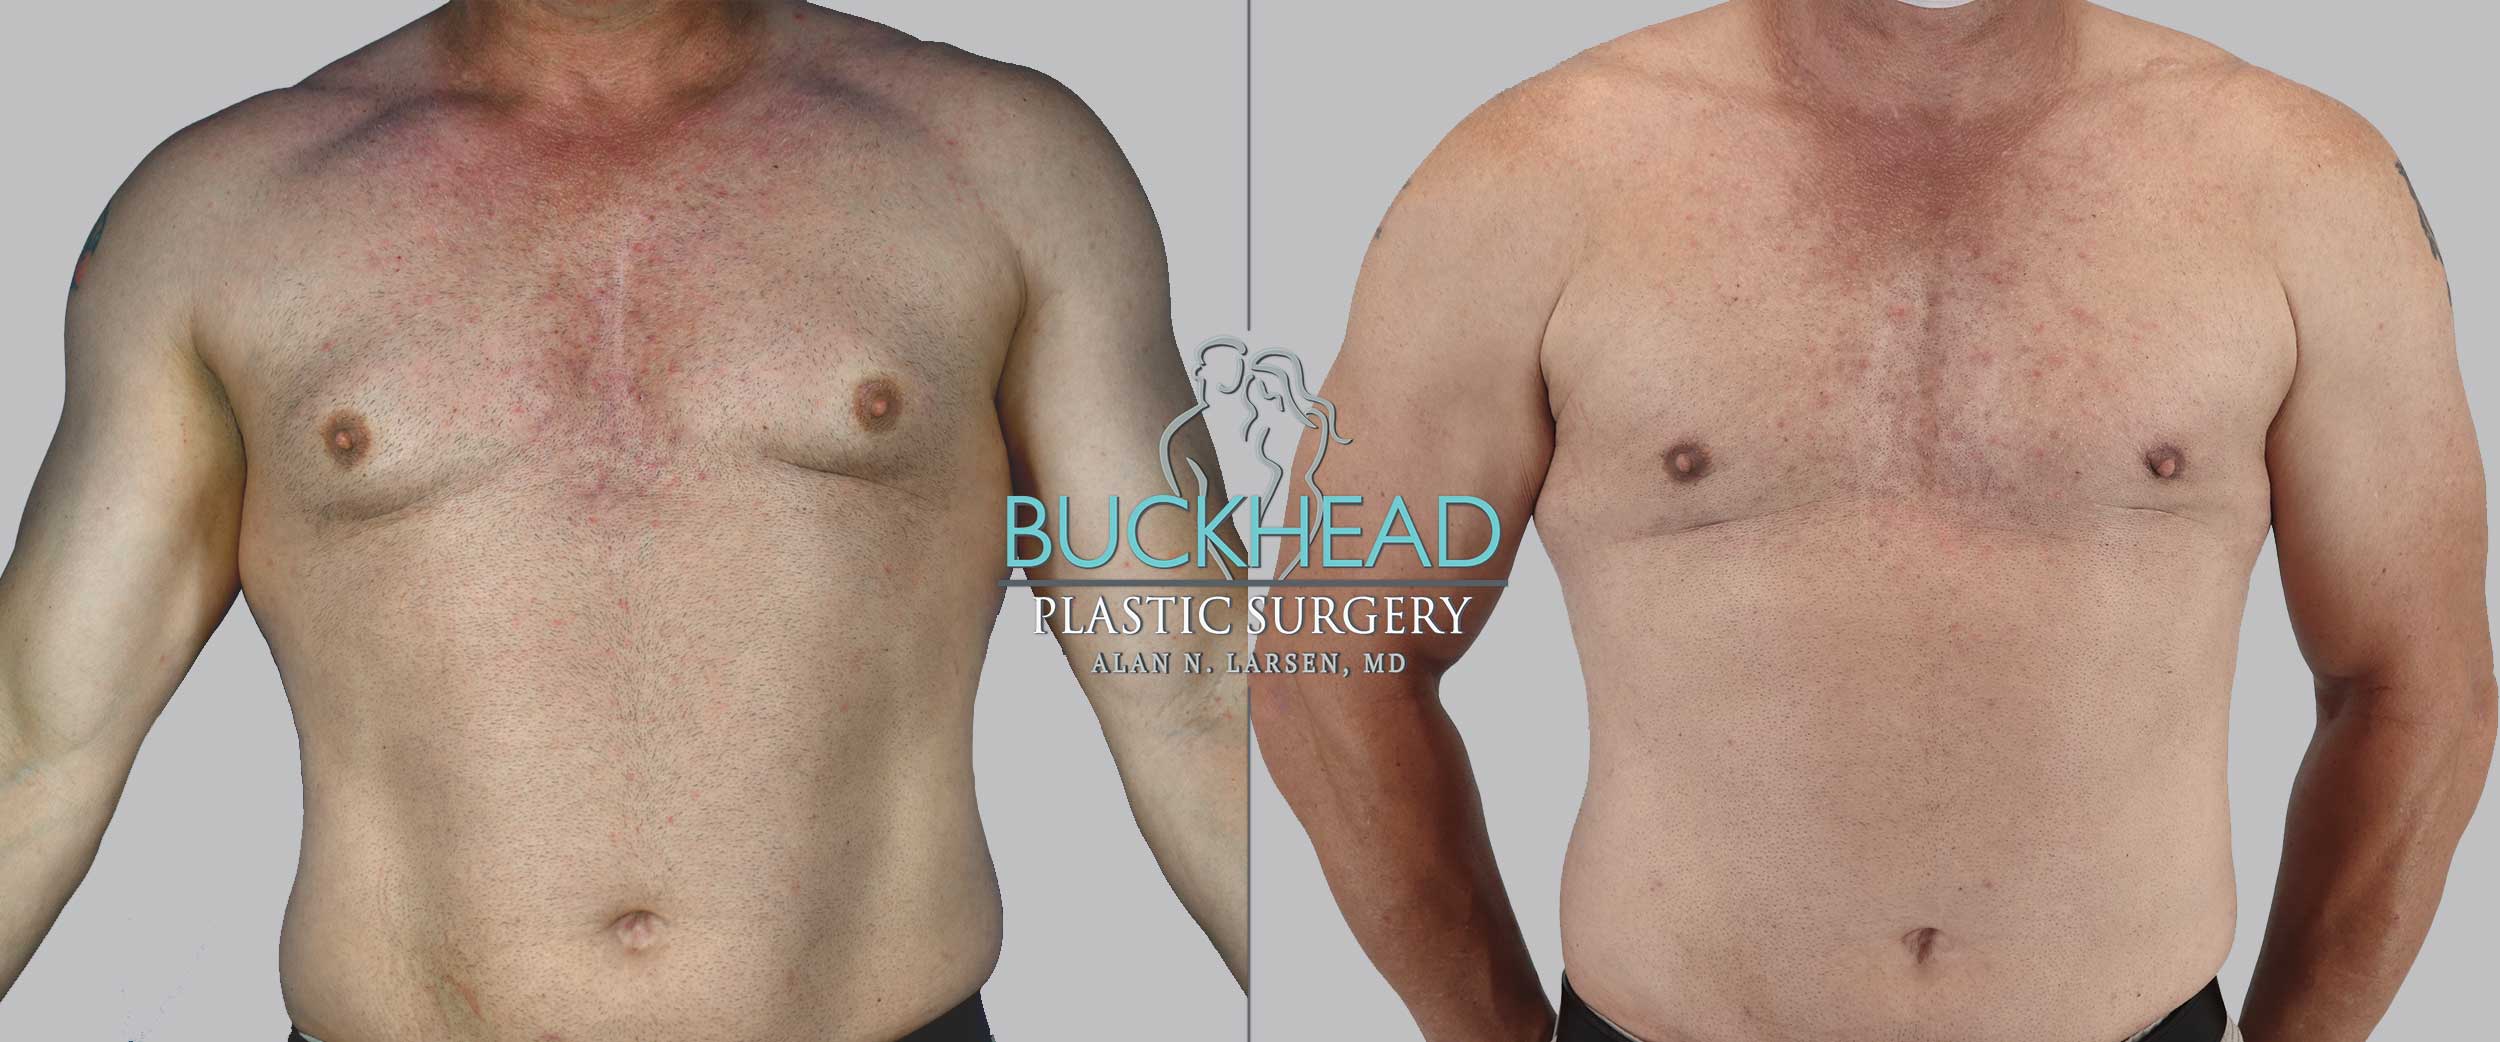 Male breast aug reduction